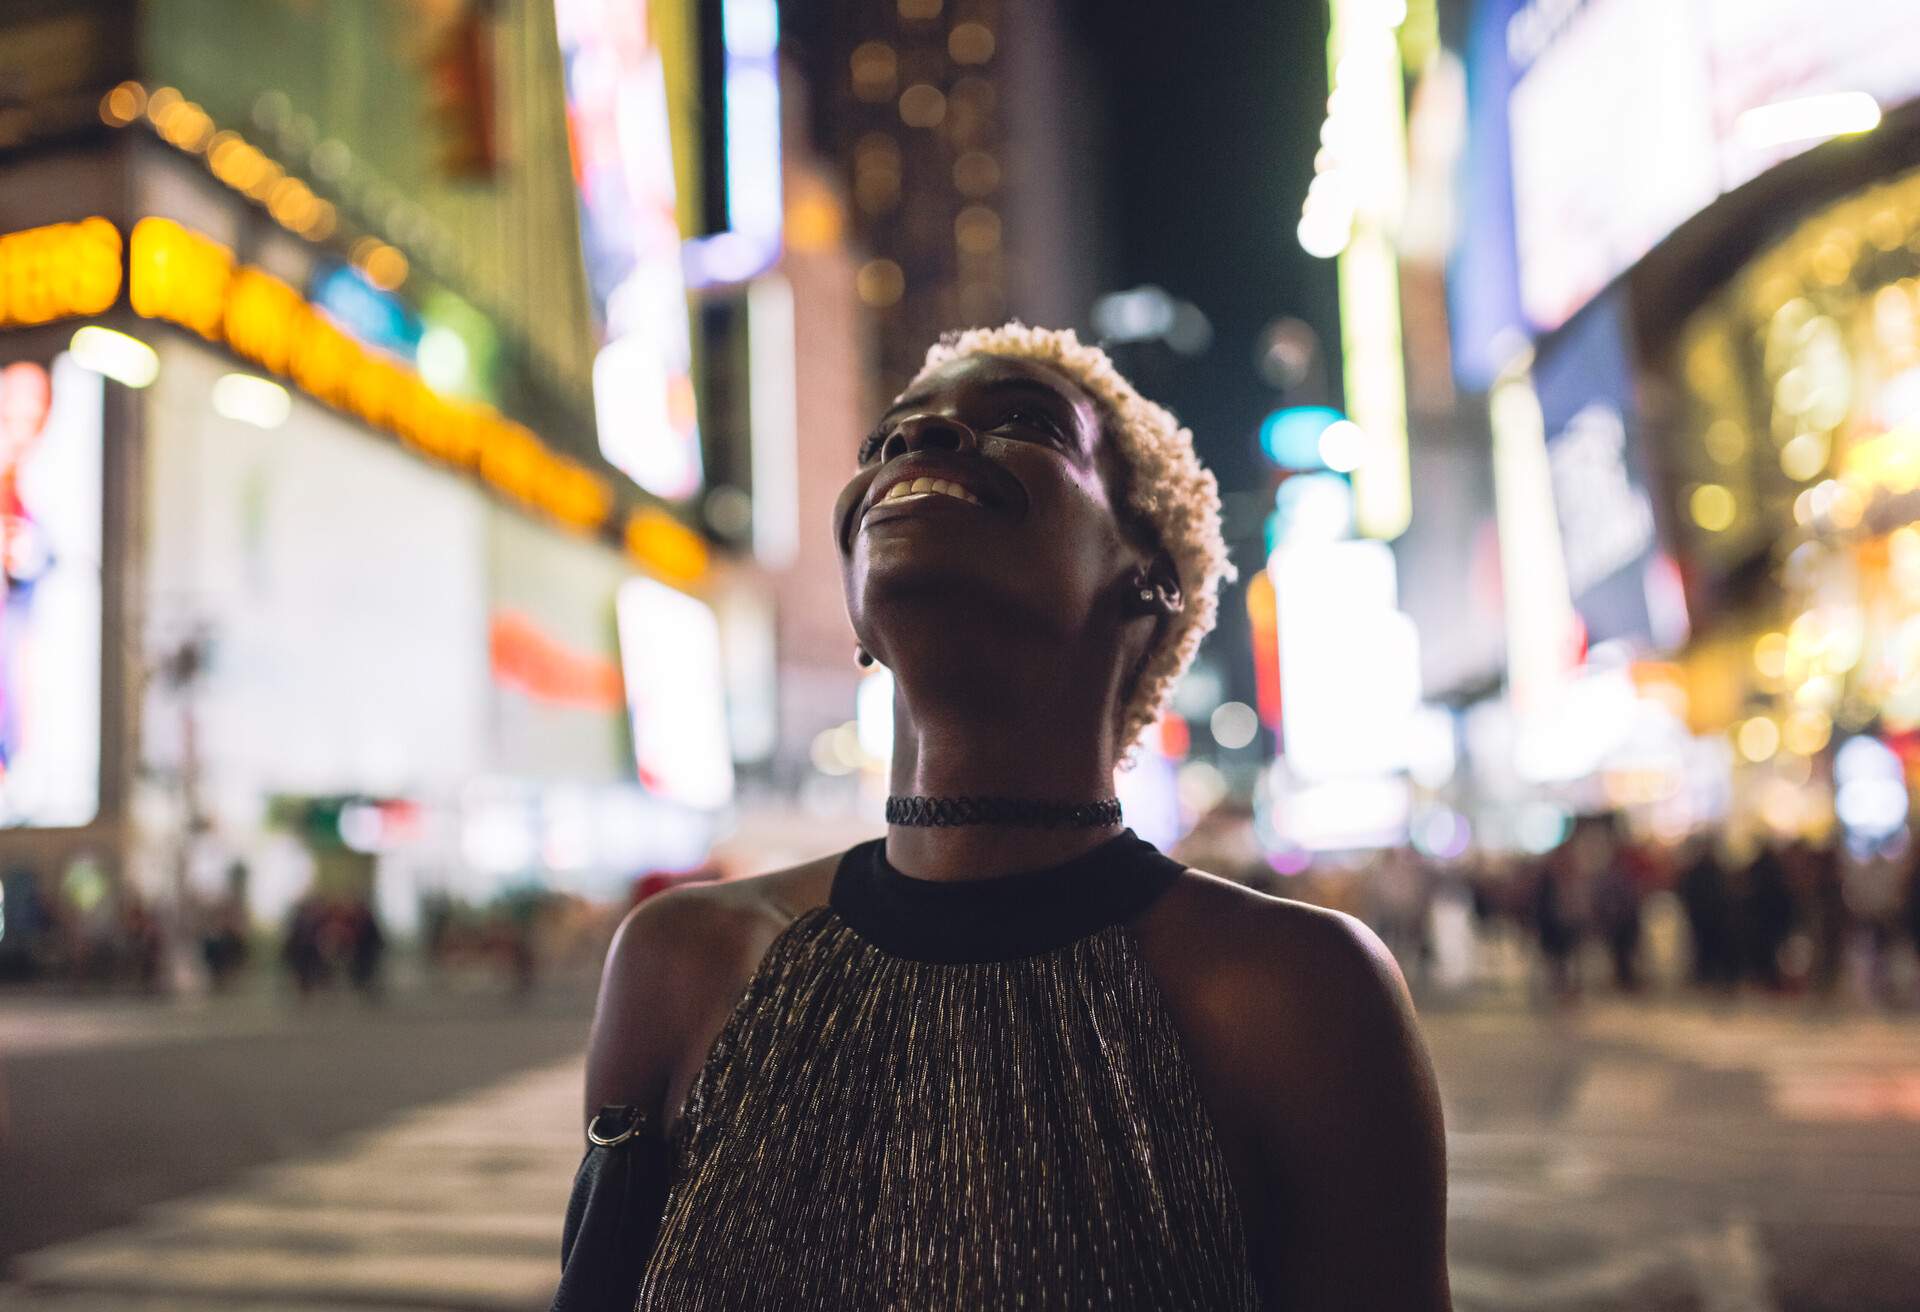 DEST_USA_NEW_YORK_TIMES_SQUARE_PEOPLE_WOMAN_GettyImages-685041011